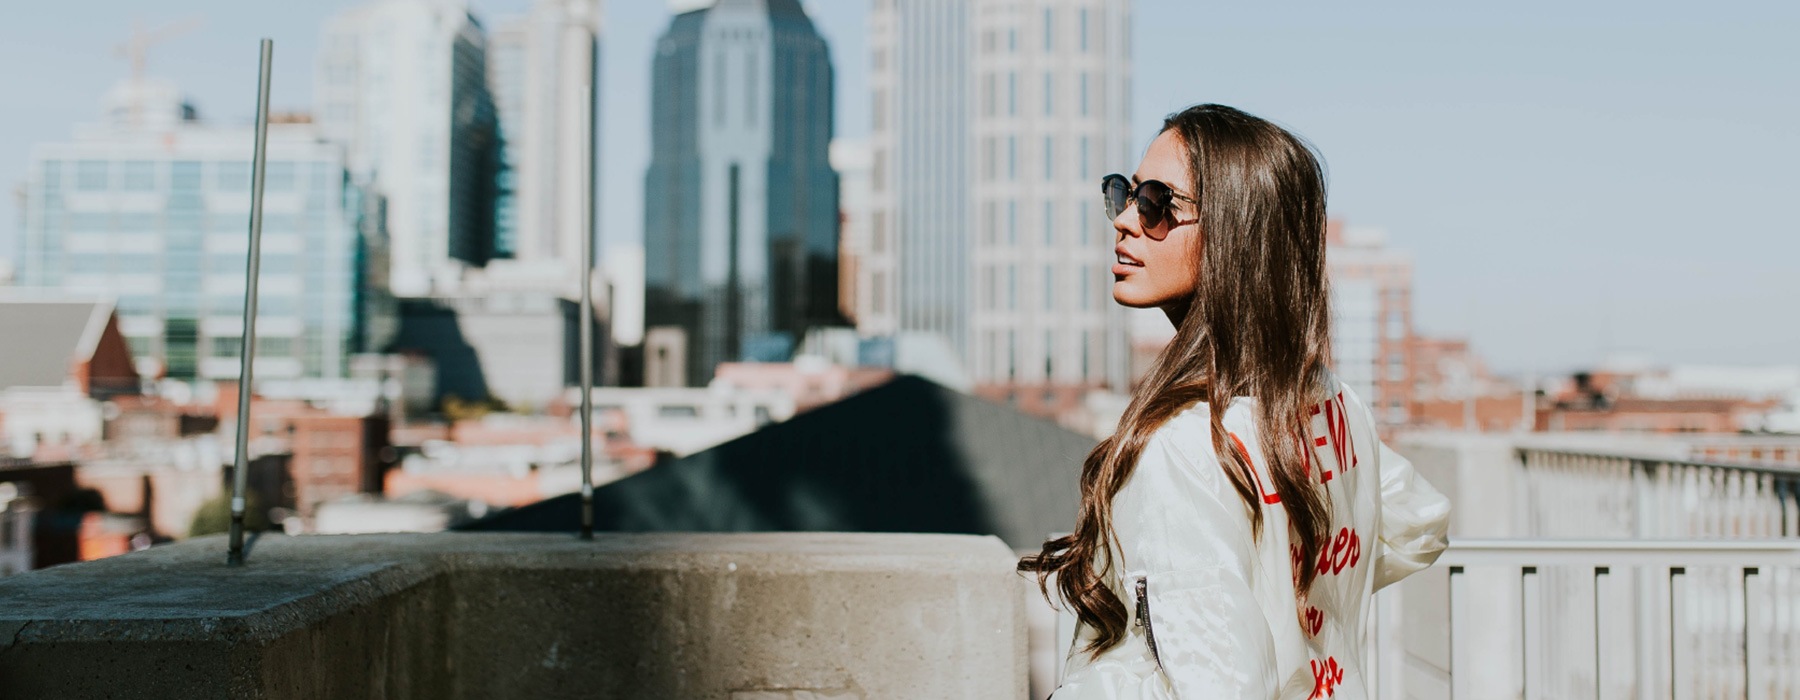 lifestyle image of a business woman looking off into the distance with a towering city skyline in the far-off background